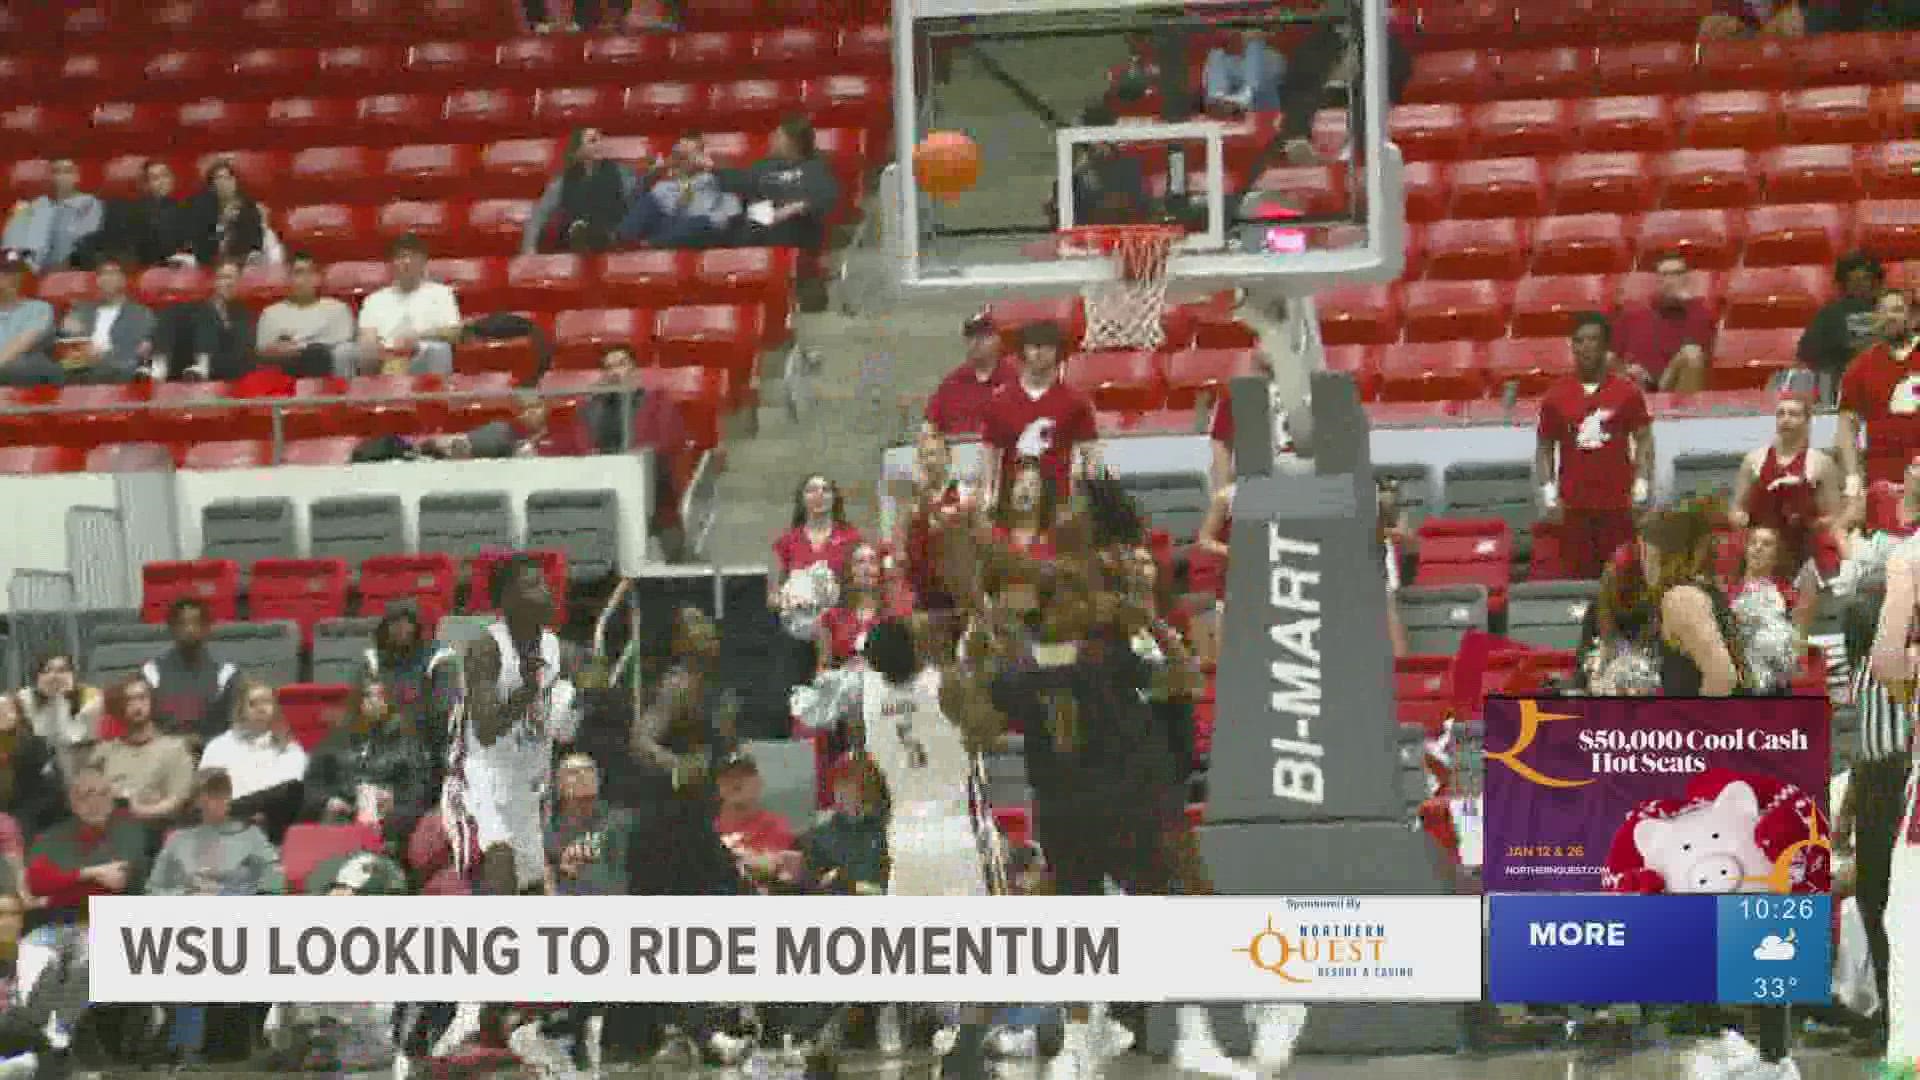 Coming off a historic win over Arizona on Saturday, the WSU men's basketball team is looking to ride that high into Wednesday's game against the Golden Bears.